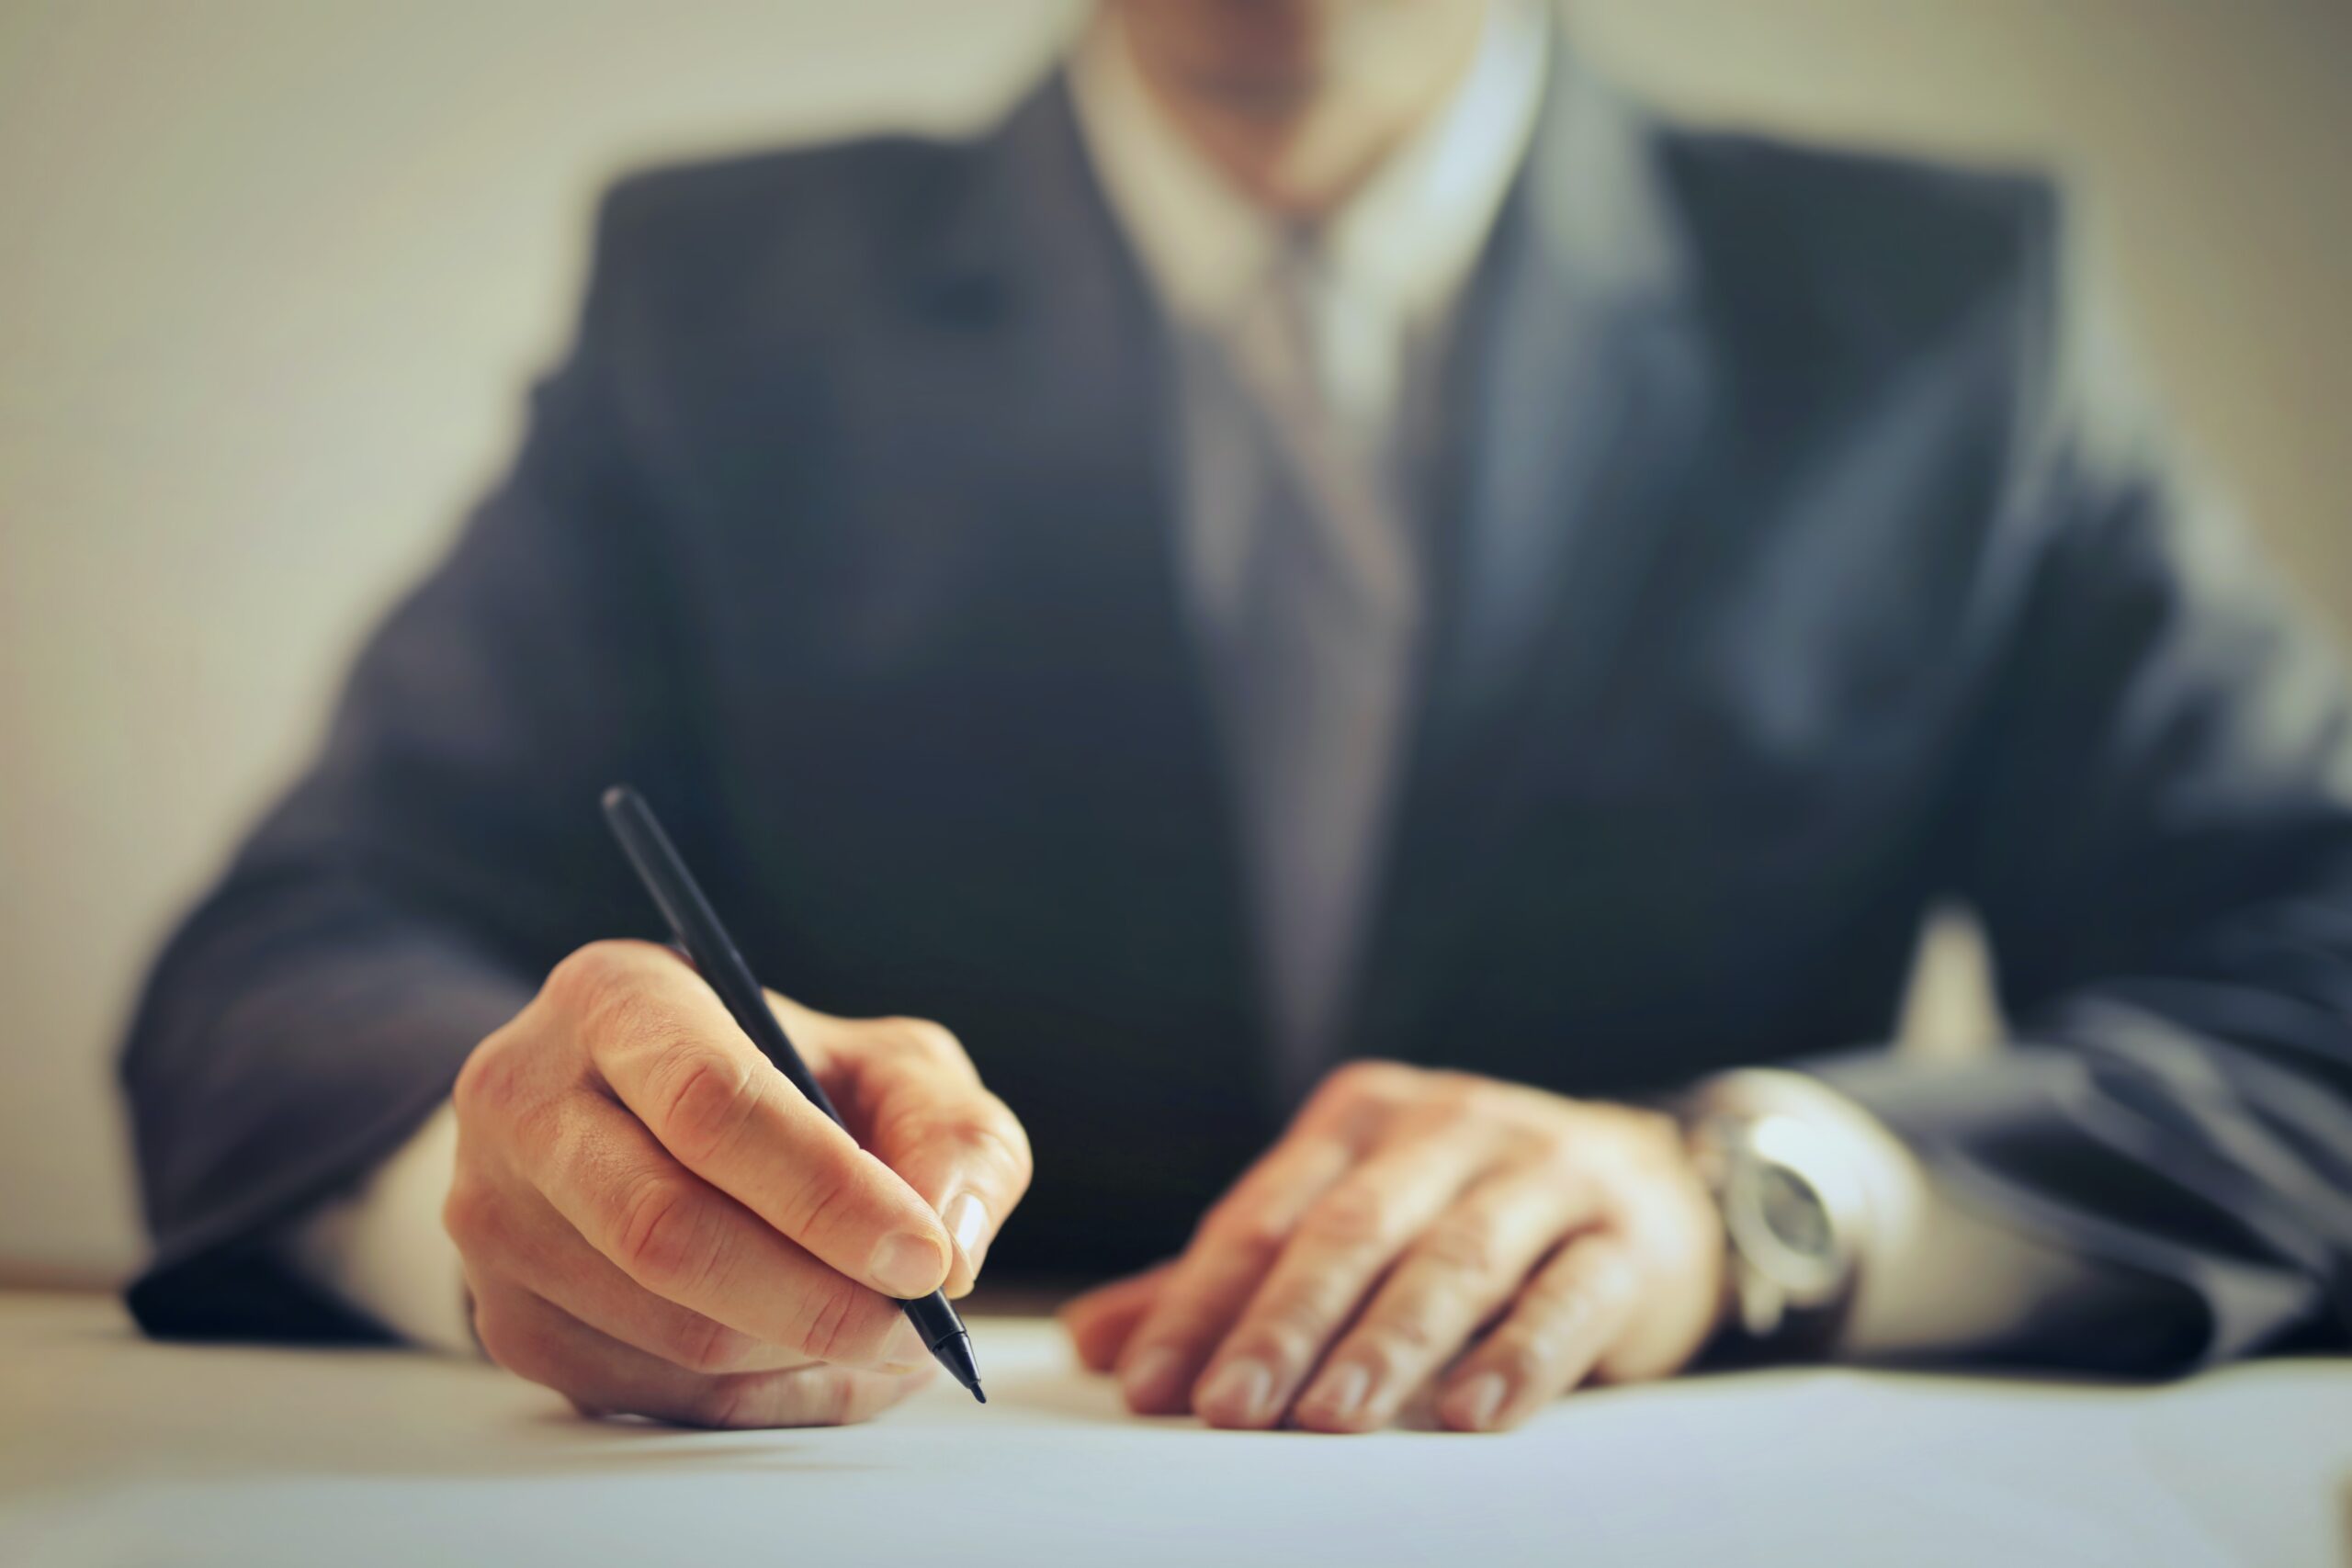 Man signing important document. Learn how asset protection is key to your financial future.